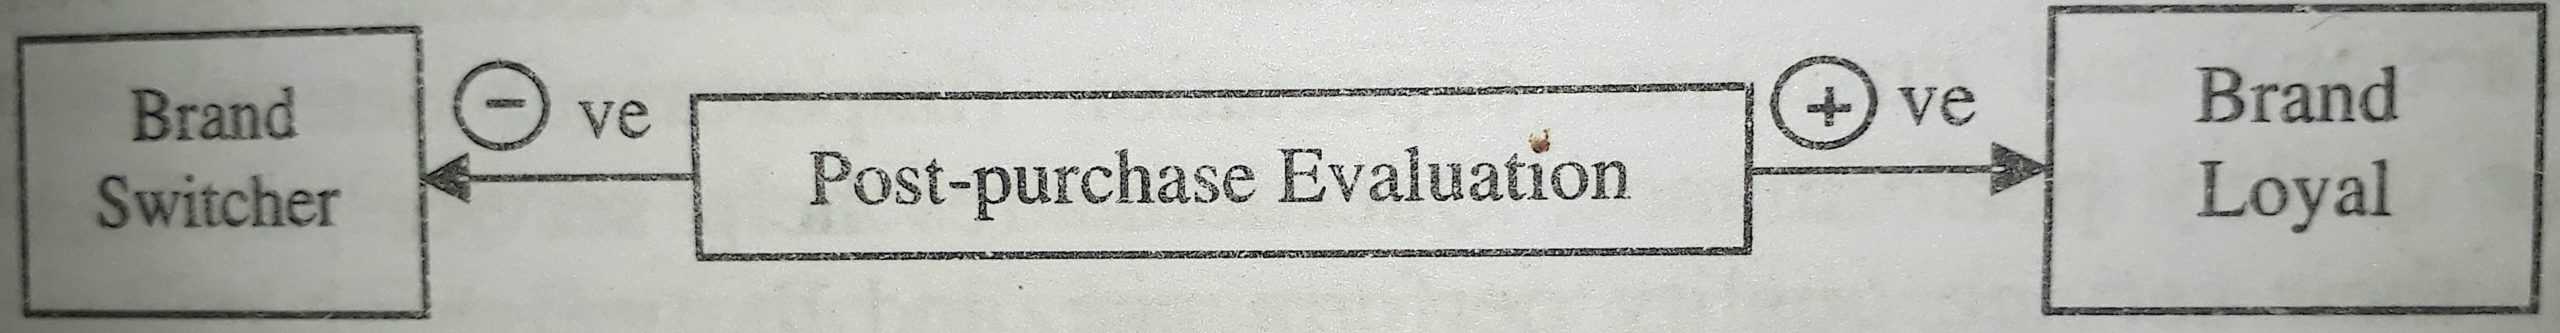 Post-purchase Evaluation